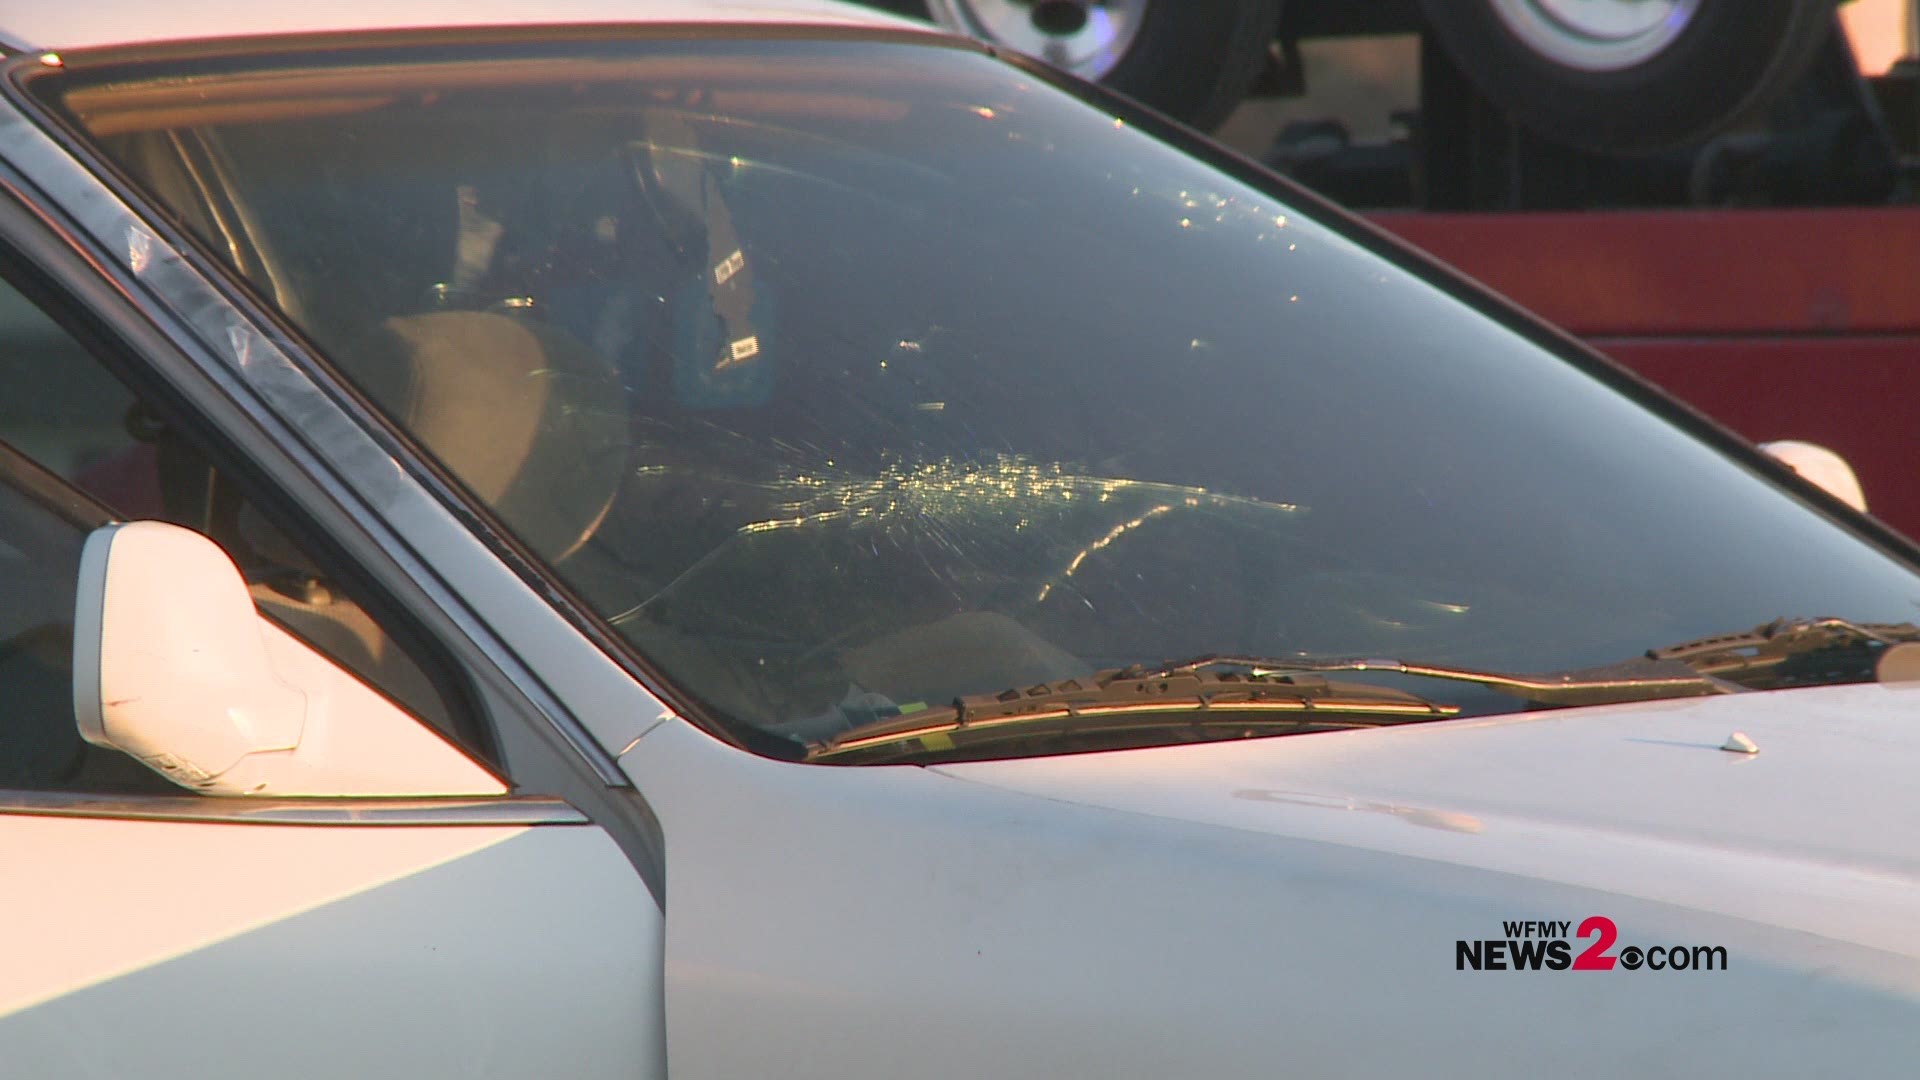 Greensboro Police found a 22-year-old man inside his car suffering from a gunshot wound, Saturday afternoon.